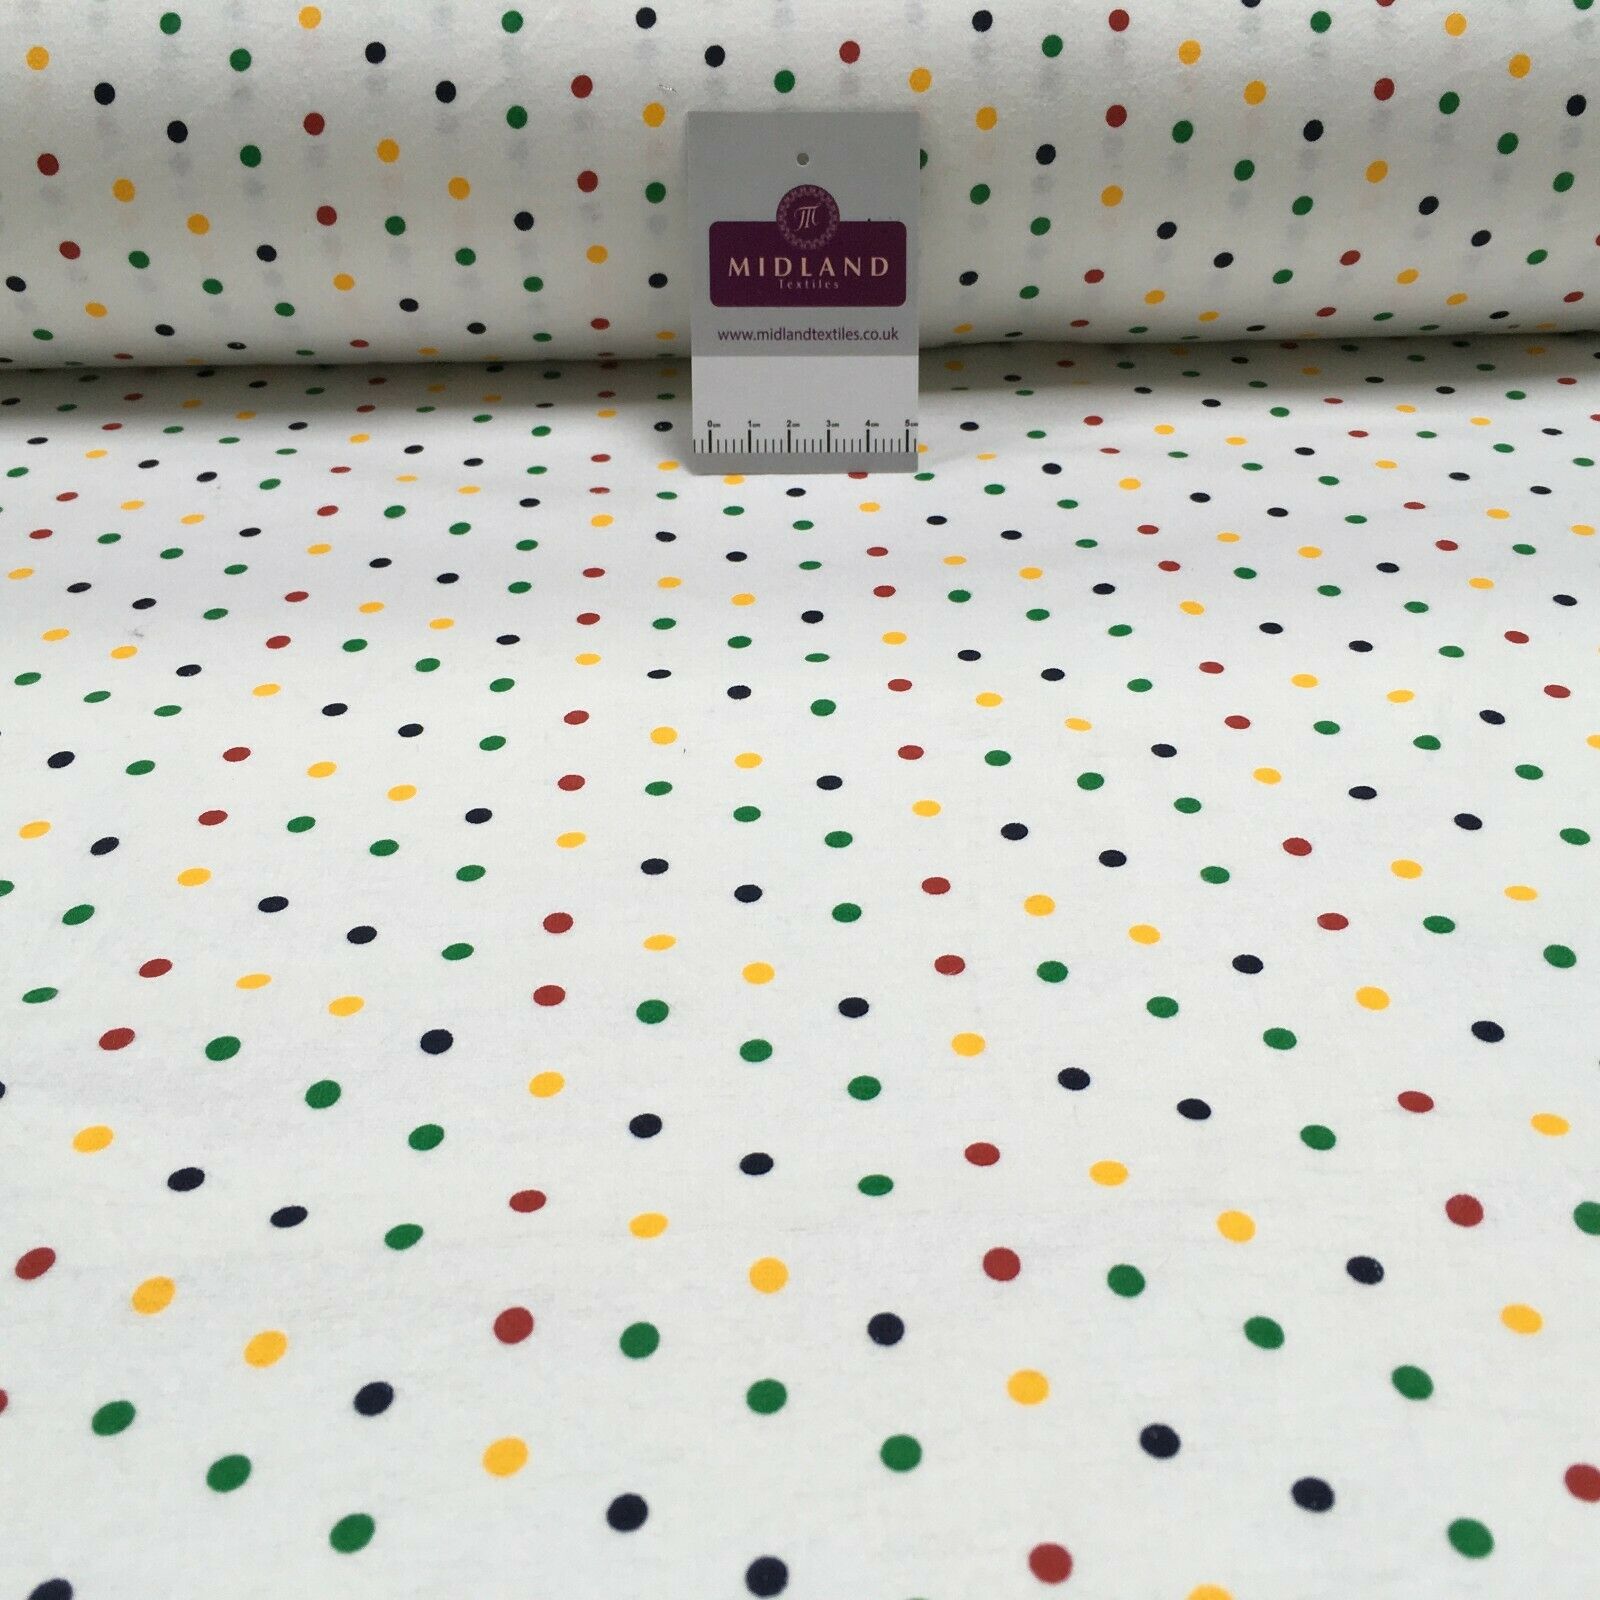 Soft Brushed cotton Winceyette Printed Fabric Many designs M1488